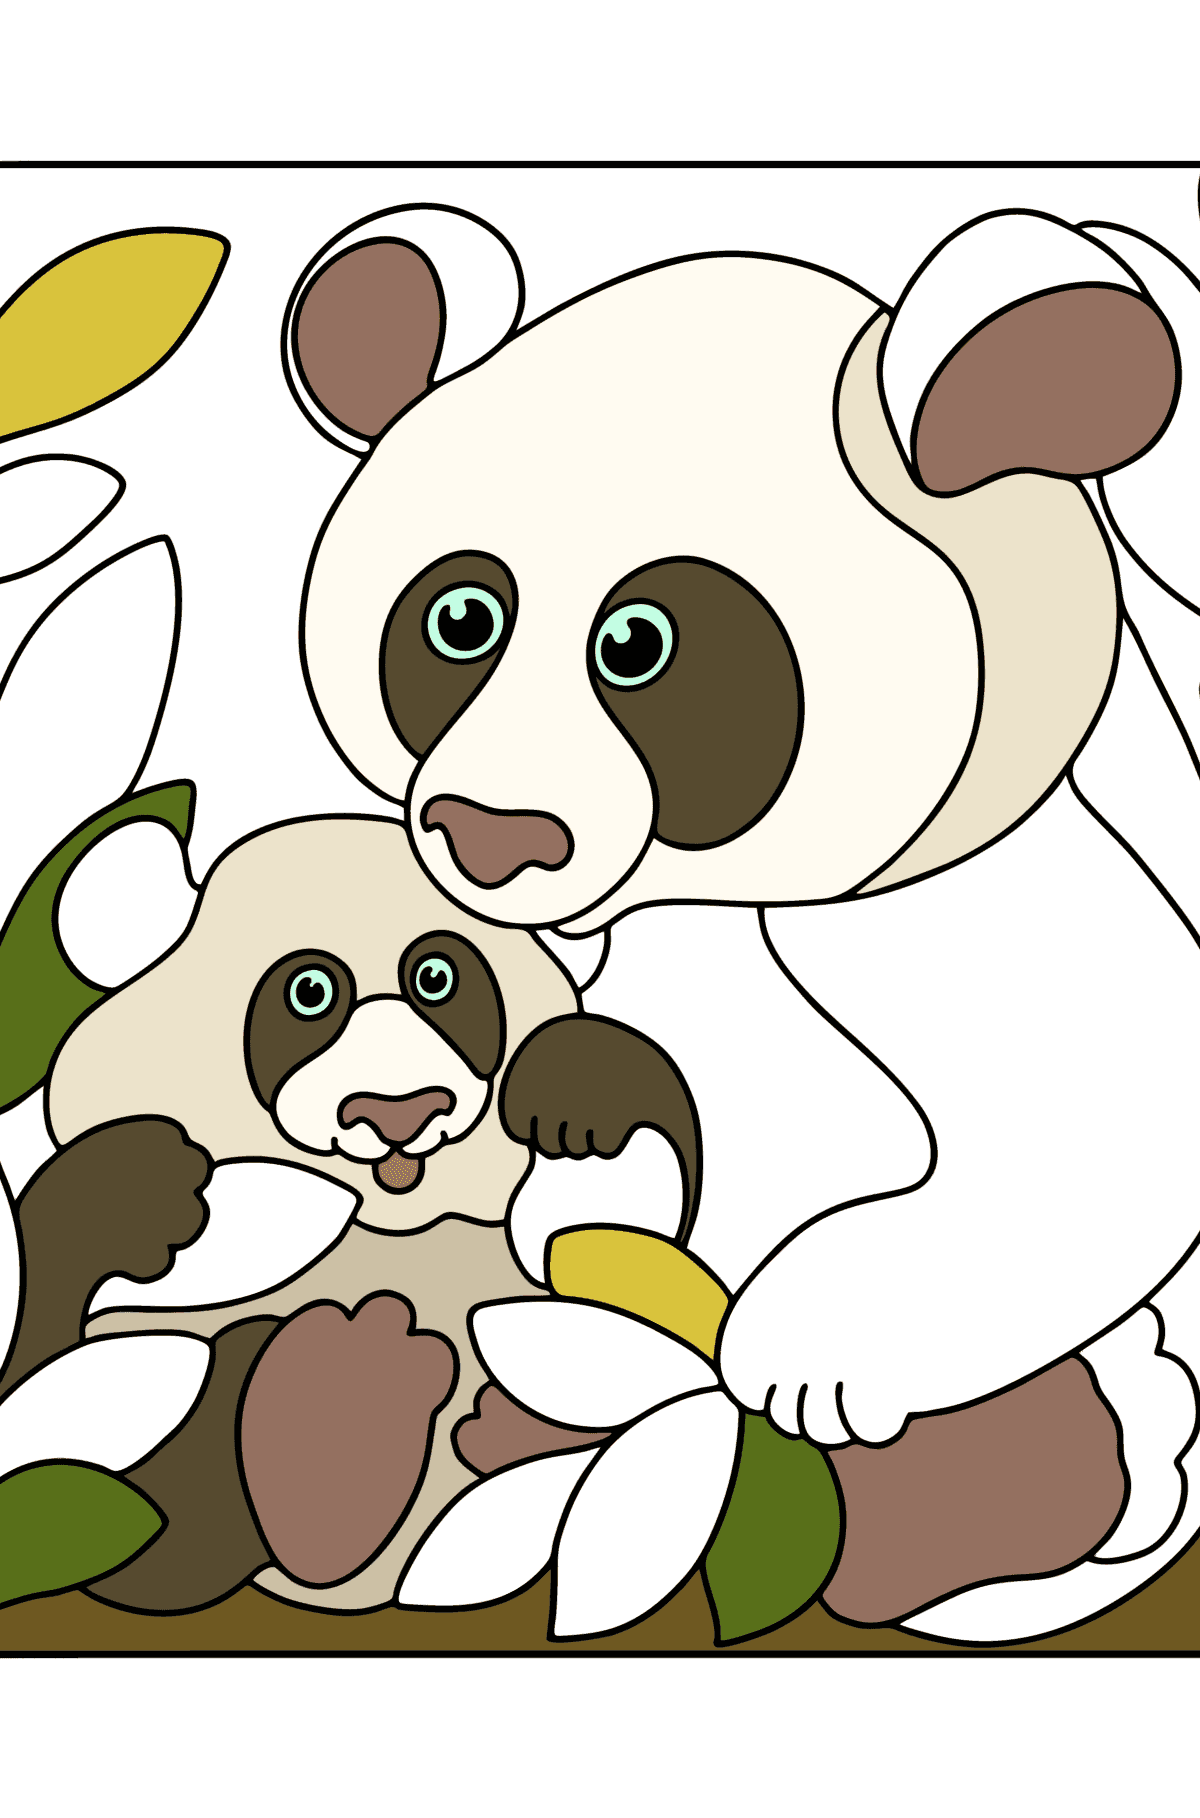 Giant panda with a cub coloring page - Coloring Pages for Kids